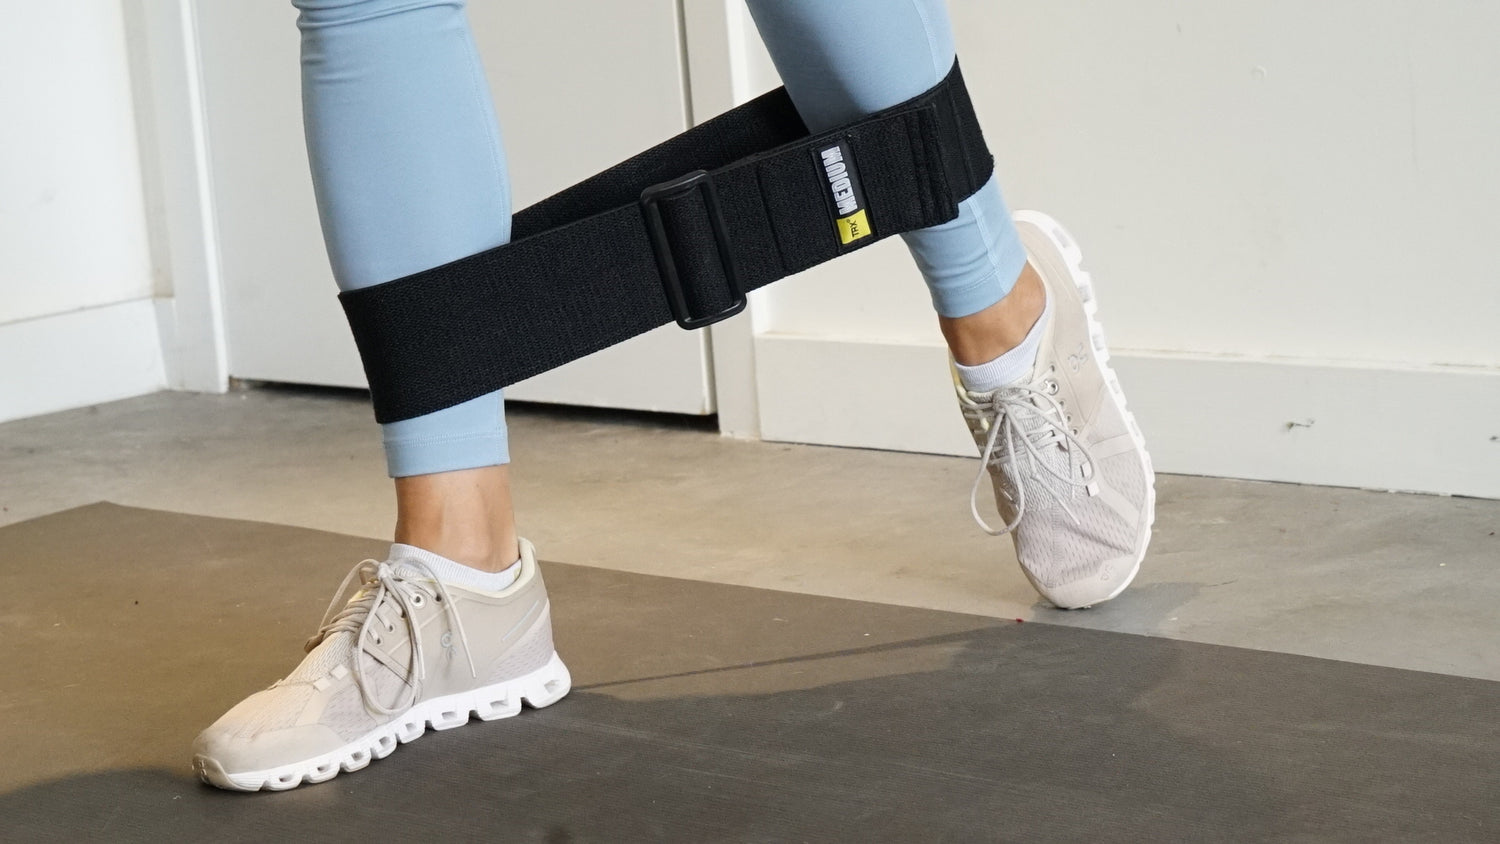 4 Glute Exercises To Feel The Burn With Our New TRX® Glute Bands